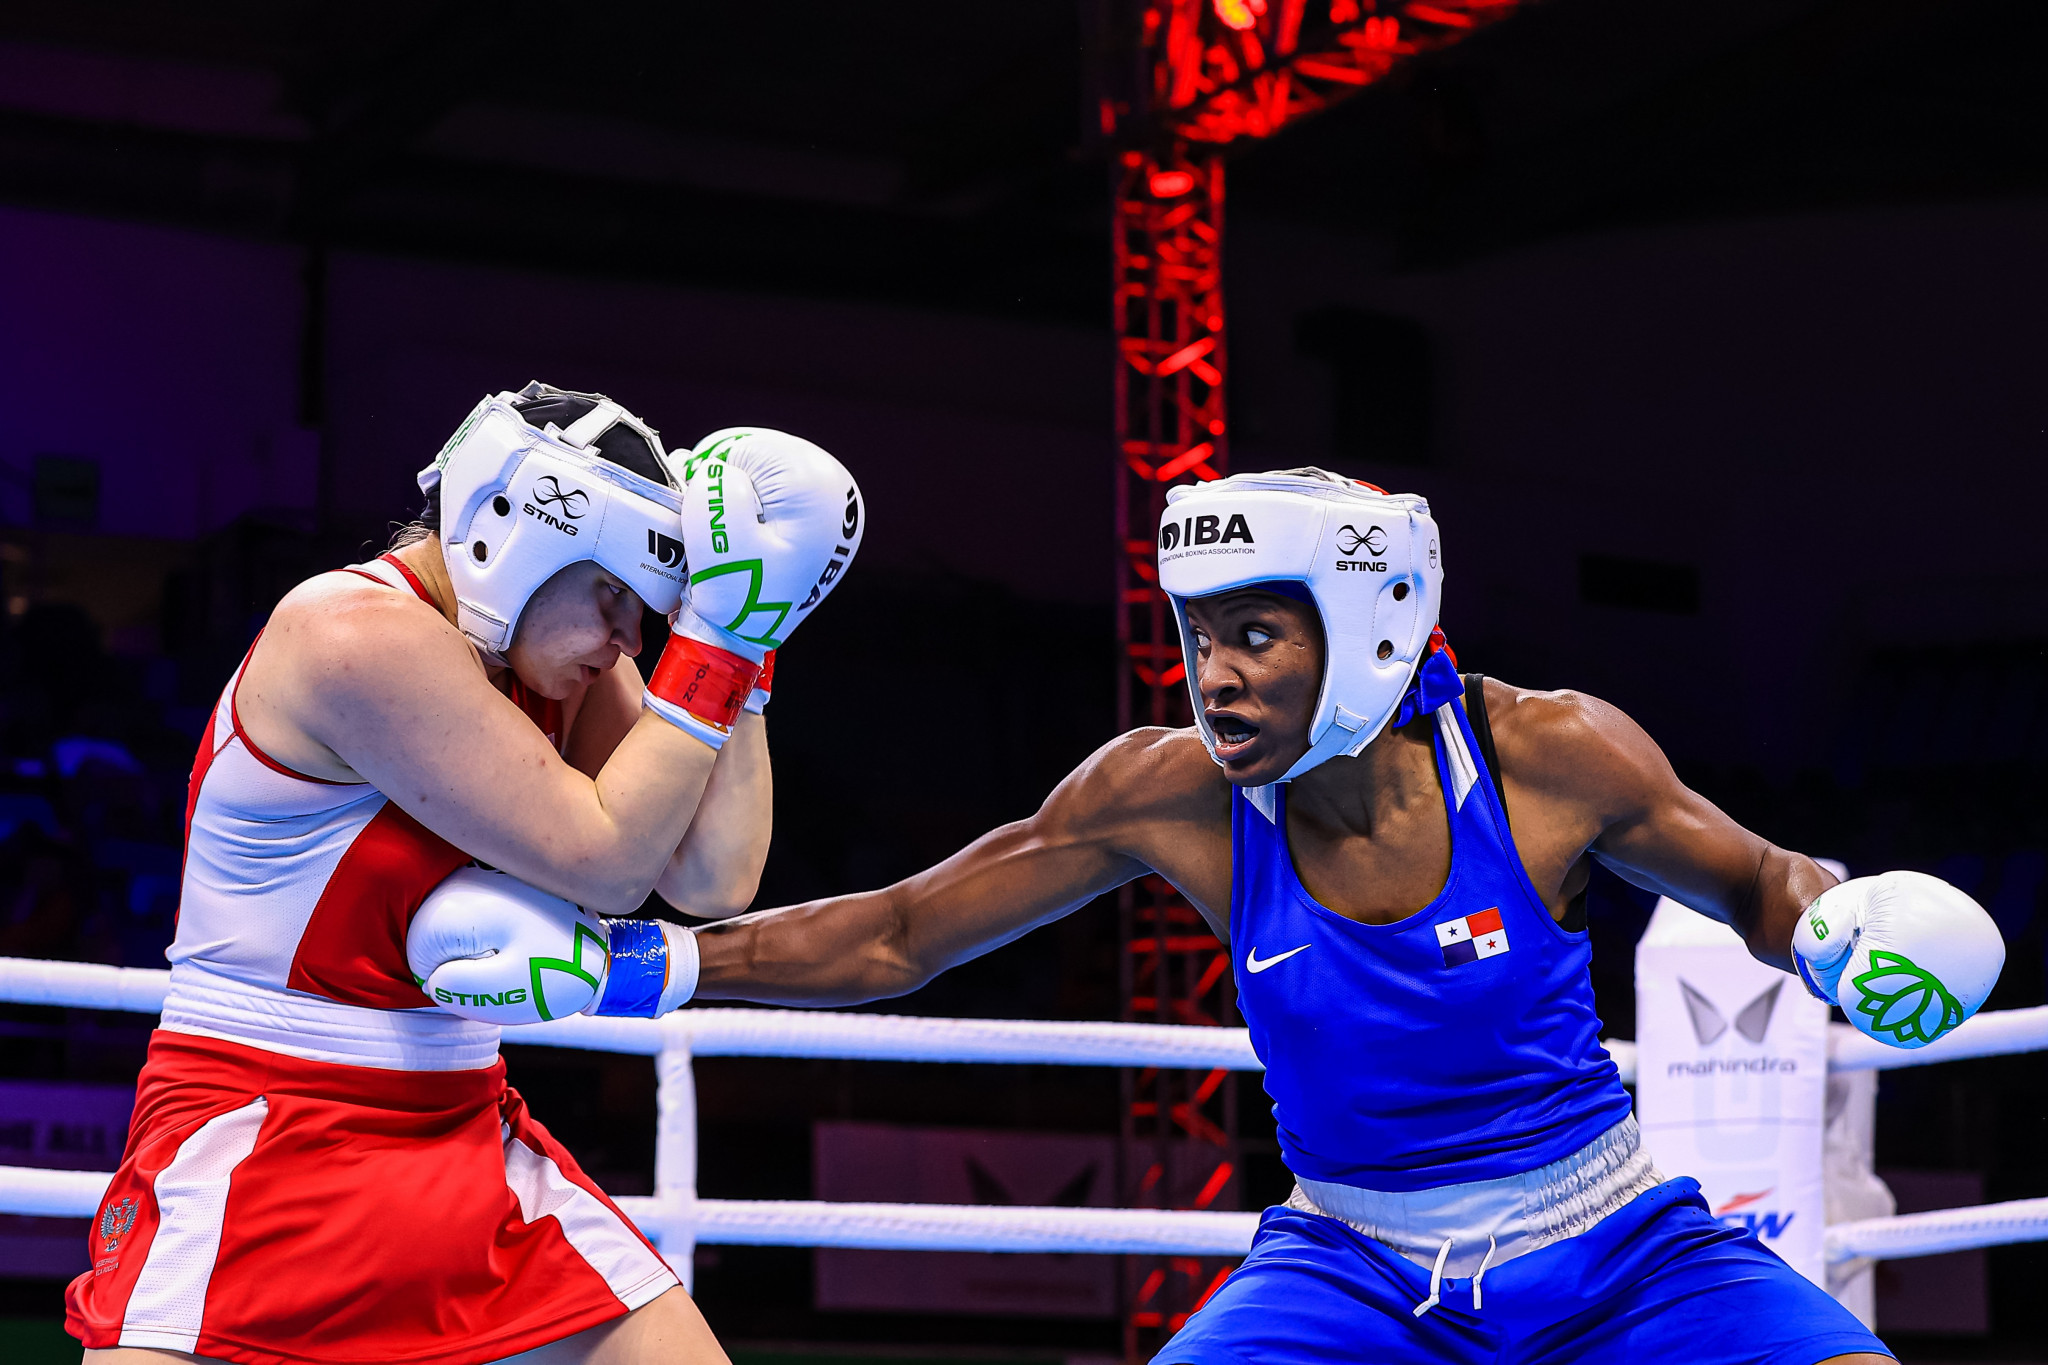 Panamanian boxer Atheyna Bylon lands a punch in her win over Russia’s Anastasiia Triebelova ©IBA